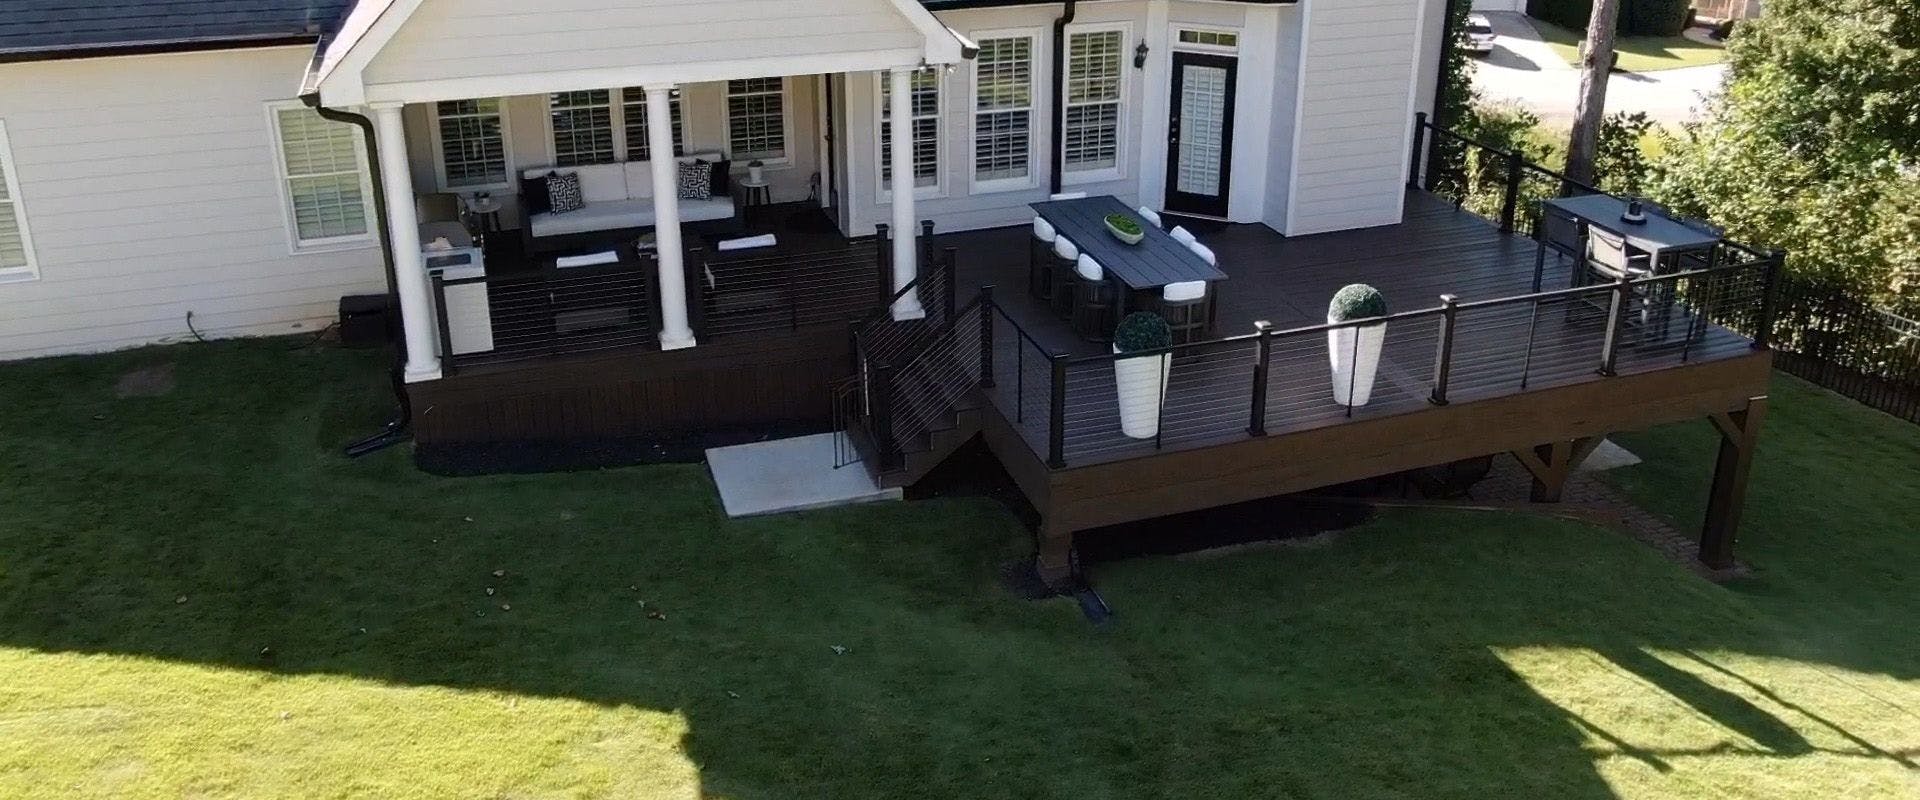 Free-standing deck replacement with skirting and under deck system.